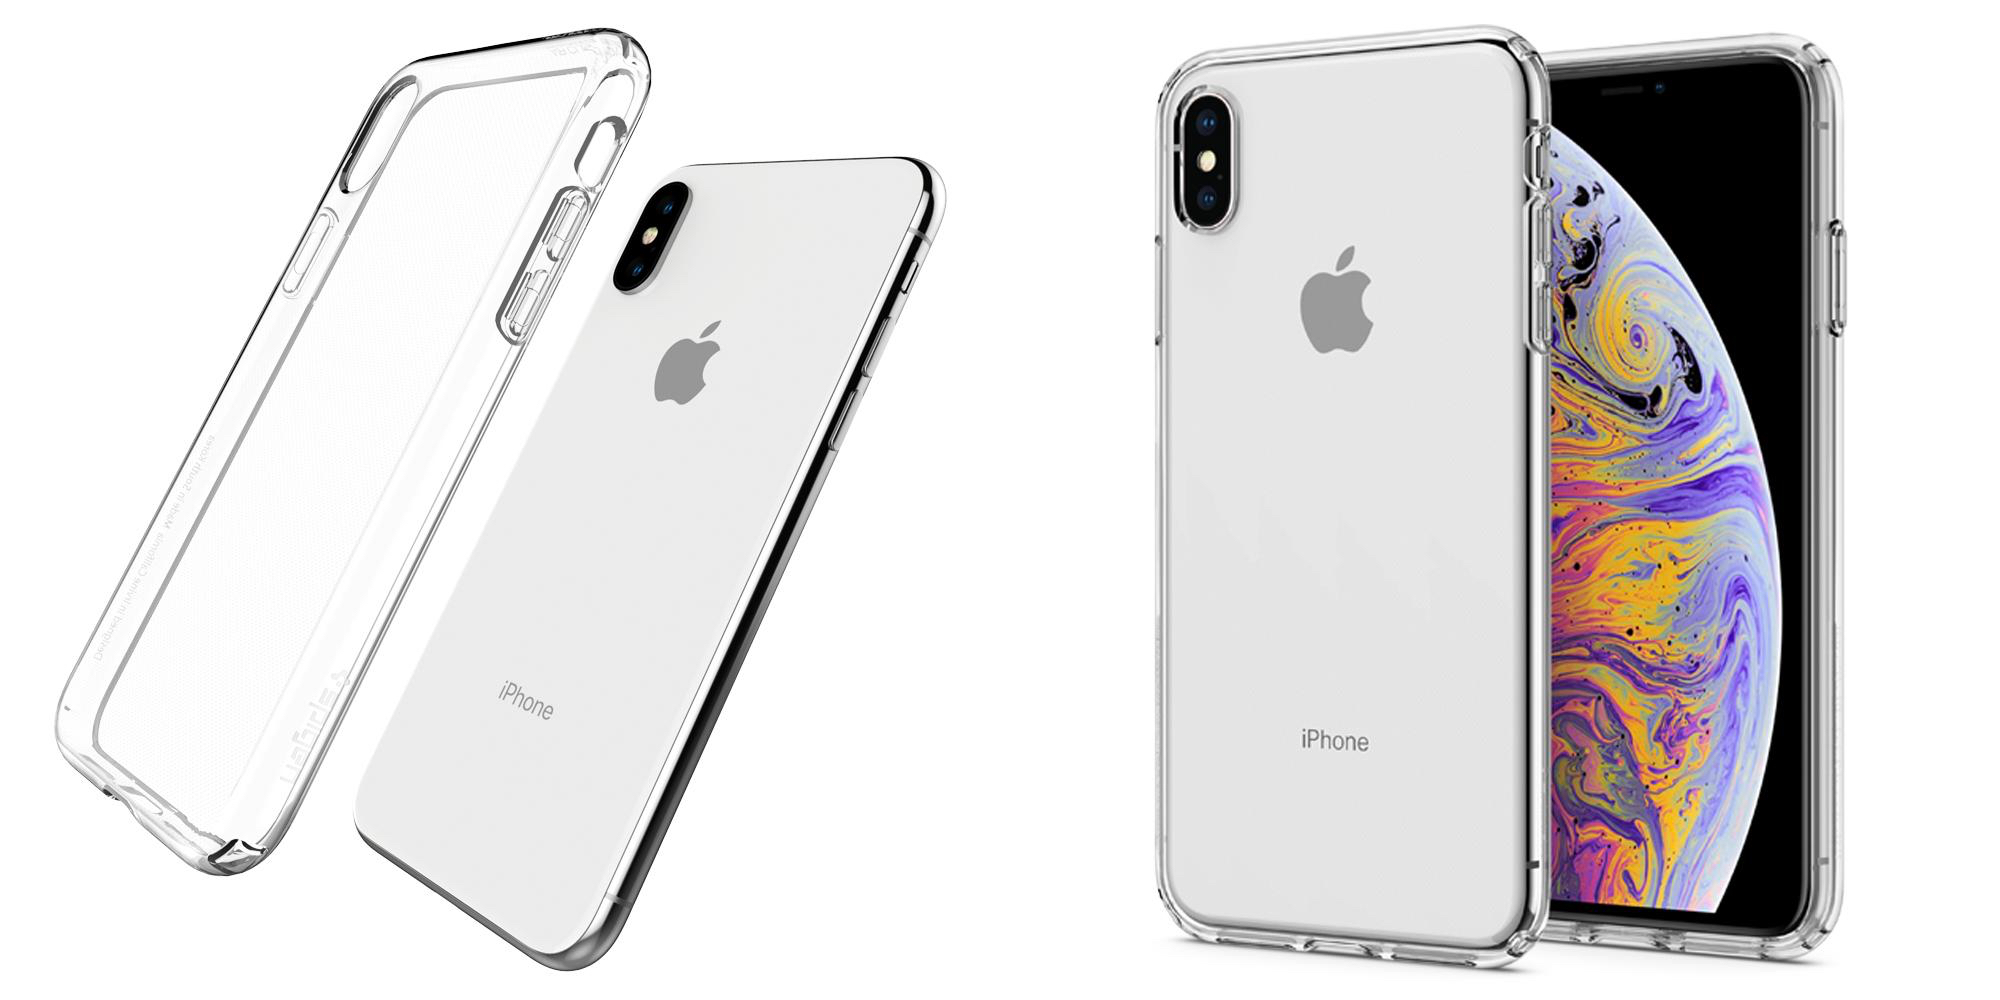 Smartphone Accessories: Spigen iPhone XS/Max Hybrid Slim Cases from $10, more - 9to5Toys